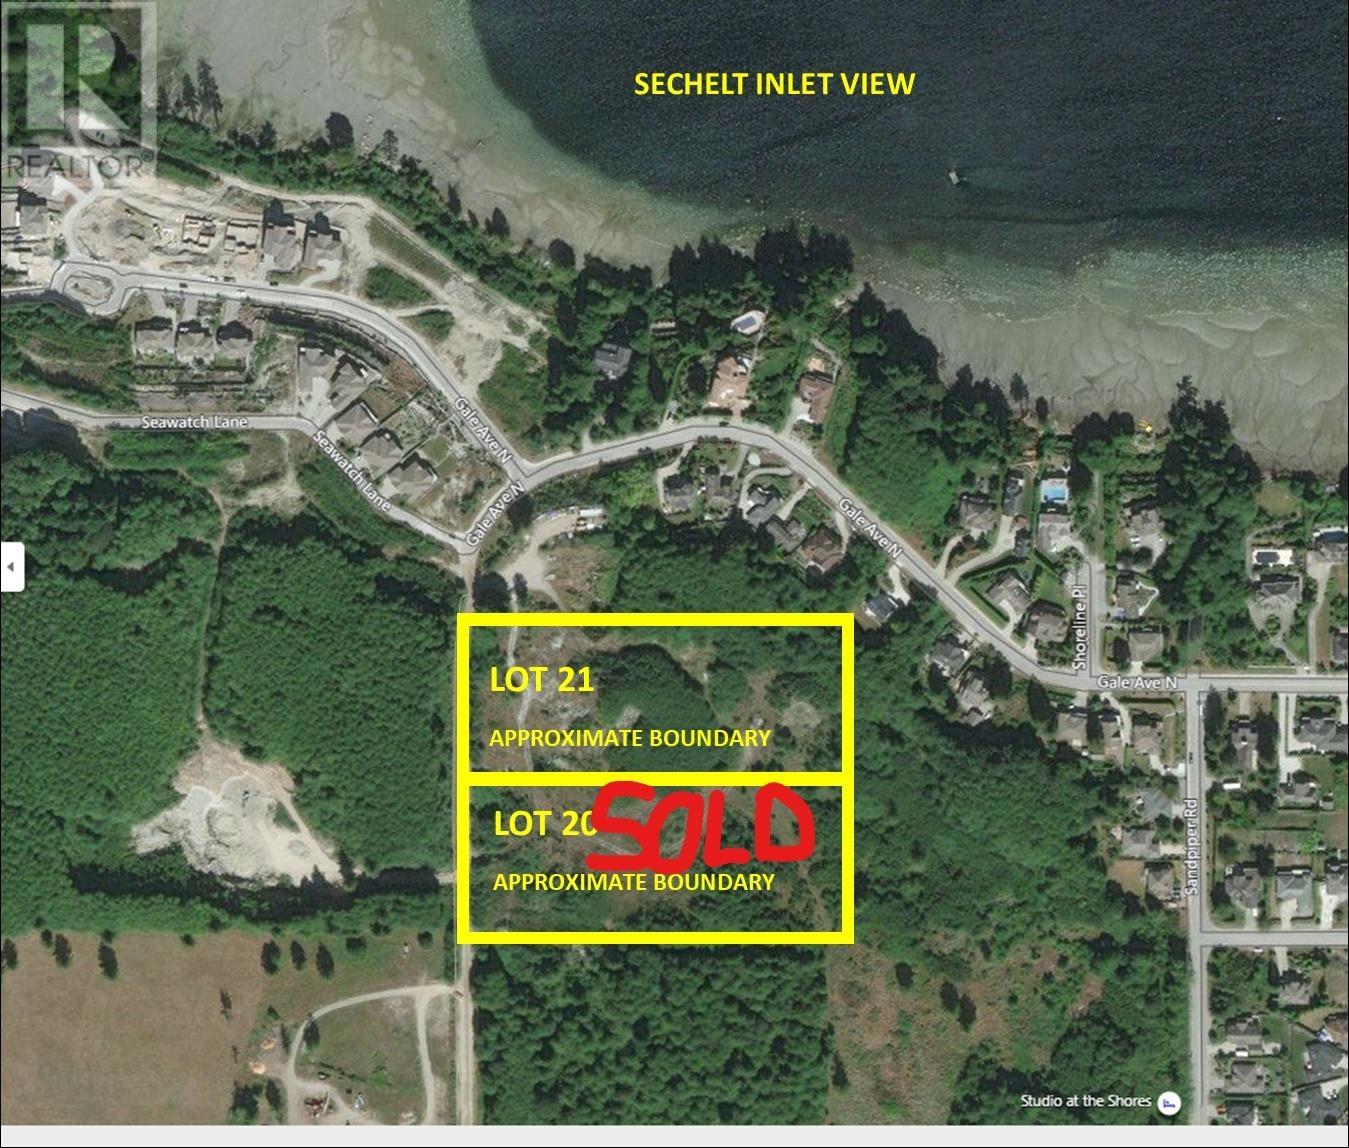 Vacant Land For Sale | Lot 21 Crowston Road | Sechelt | V0N3A5